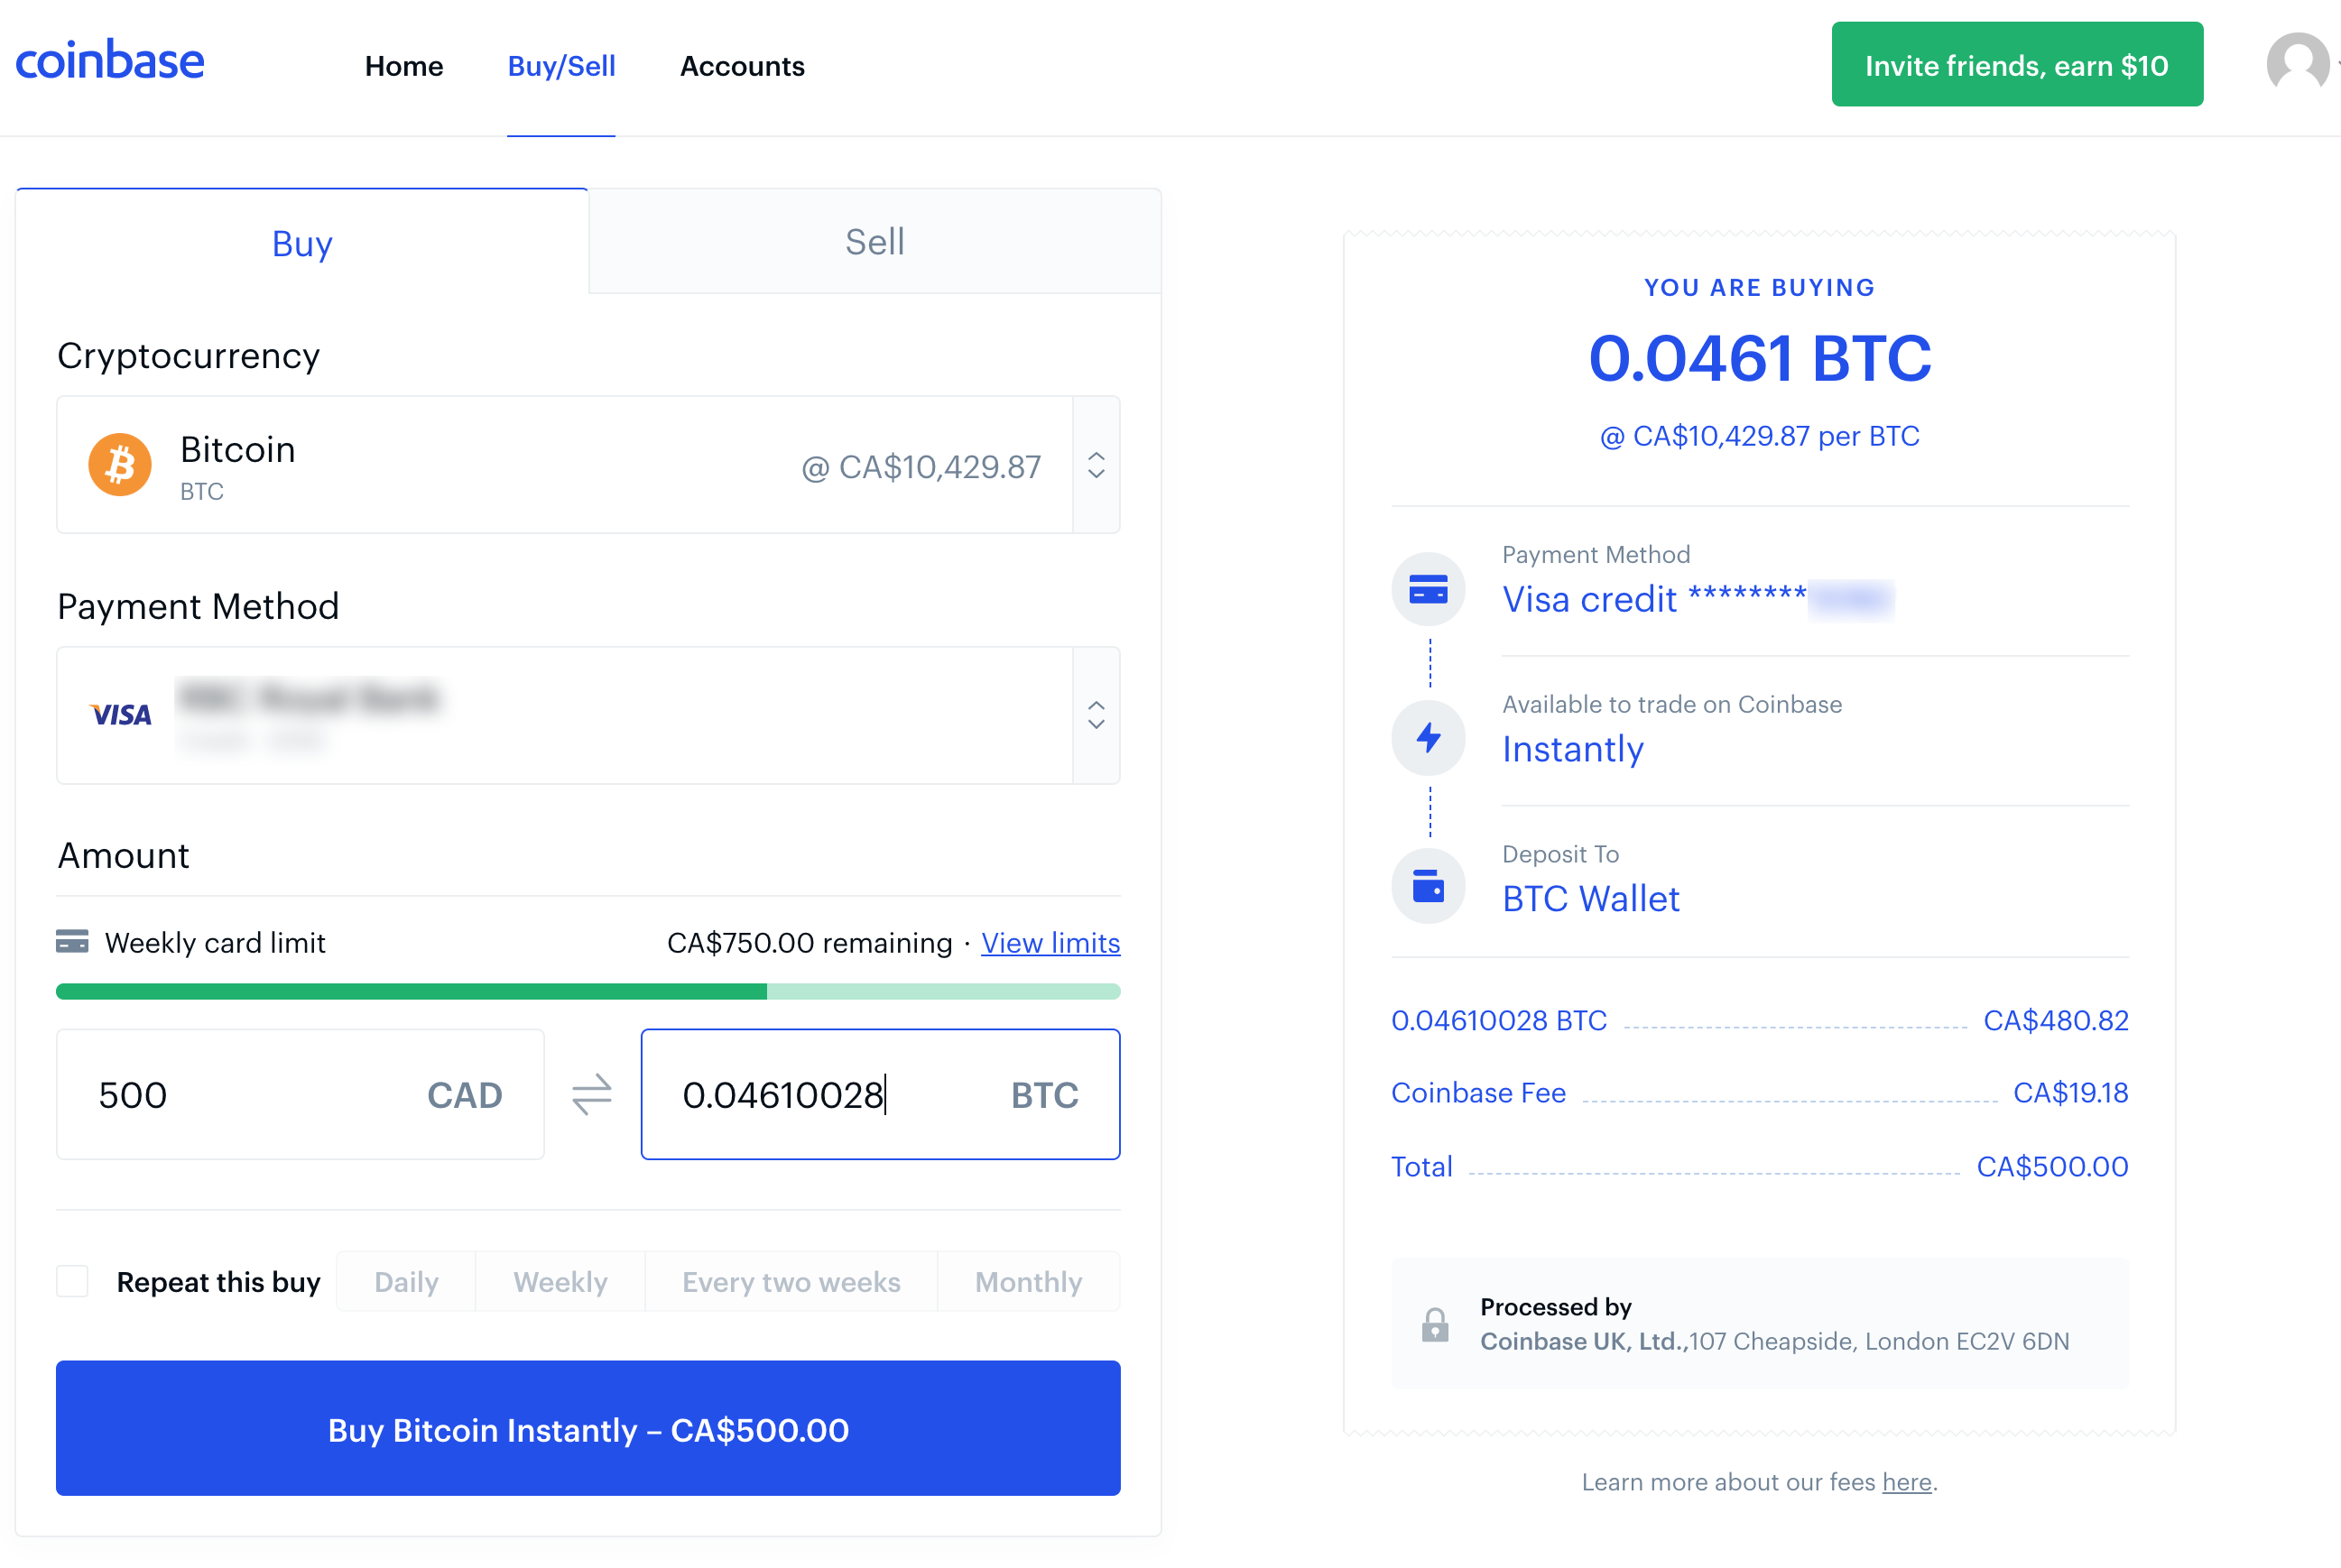 How To Buy BitCoin On Coinbase - The Easiest & Quickest ...